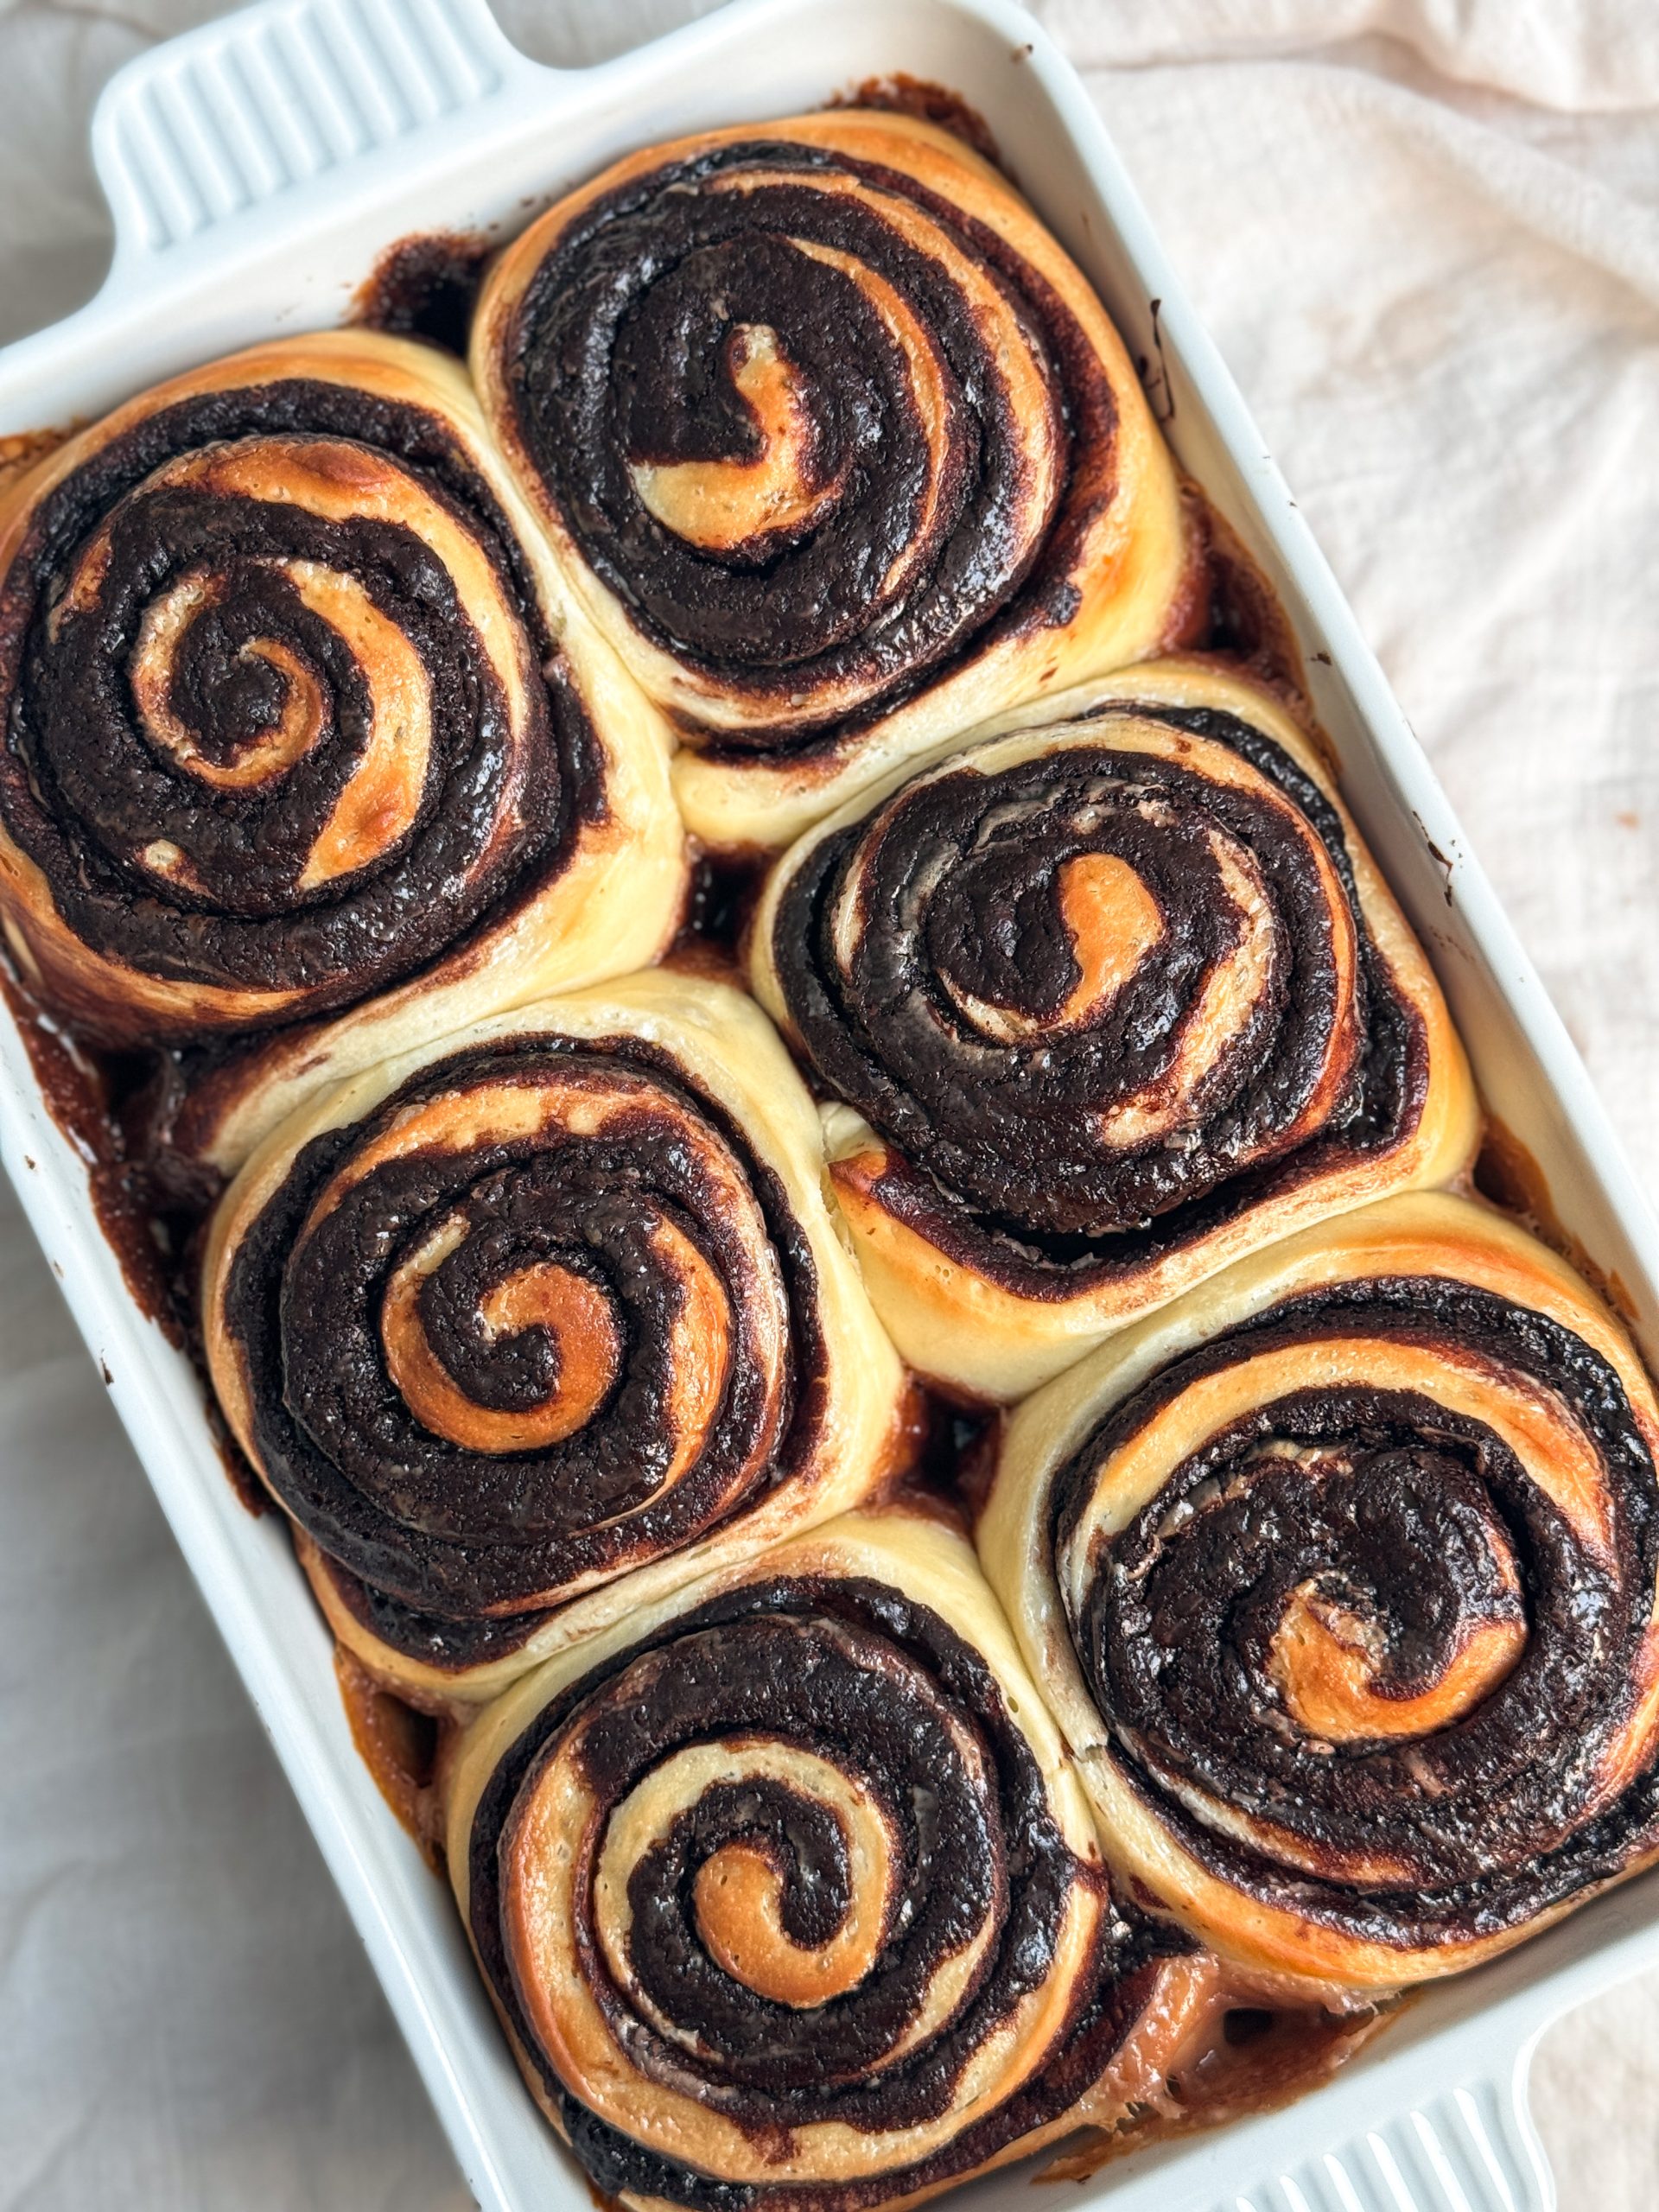 6 baked chocolate espresso rolls showing light golden bread with swirls of chocolate inside